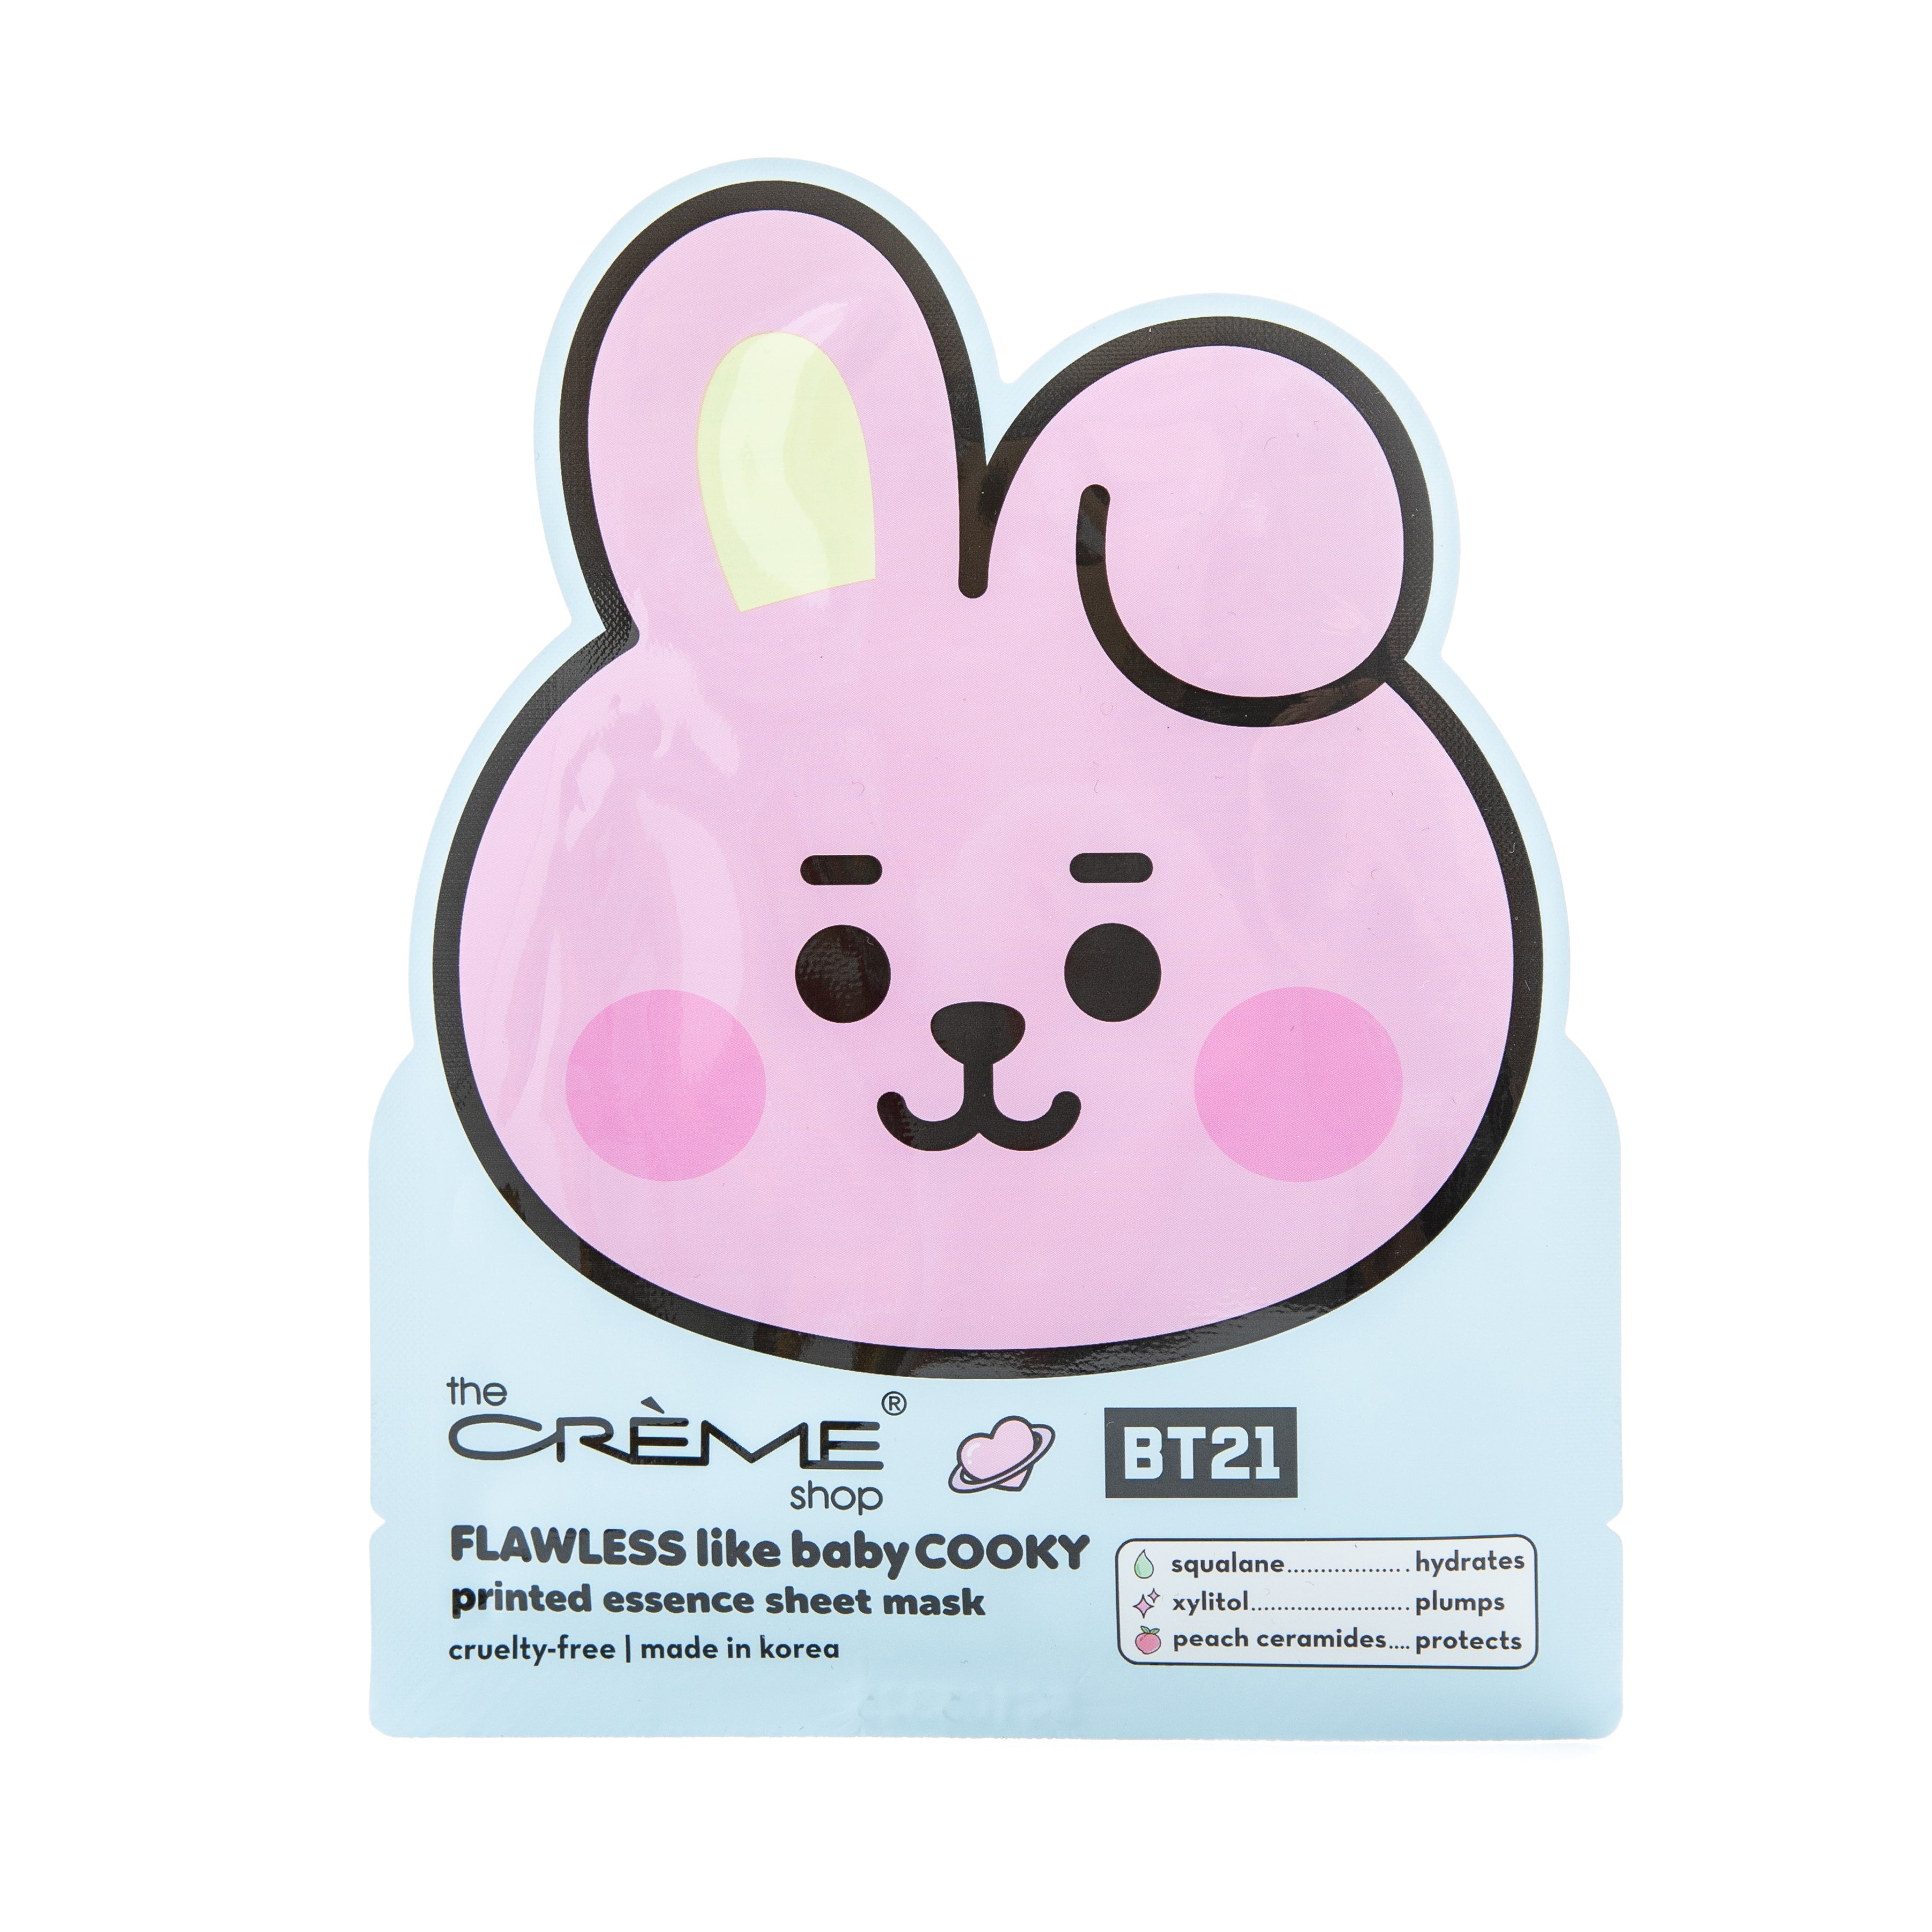 Shop The Crème Shop BT21 FLAWLESS Like Baby COOKY Printed Essence